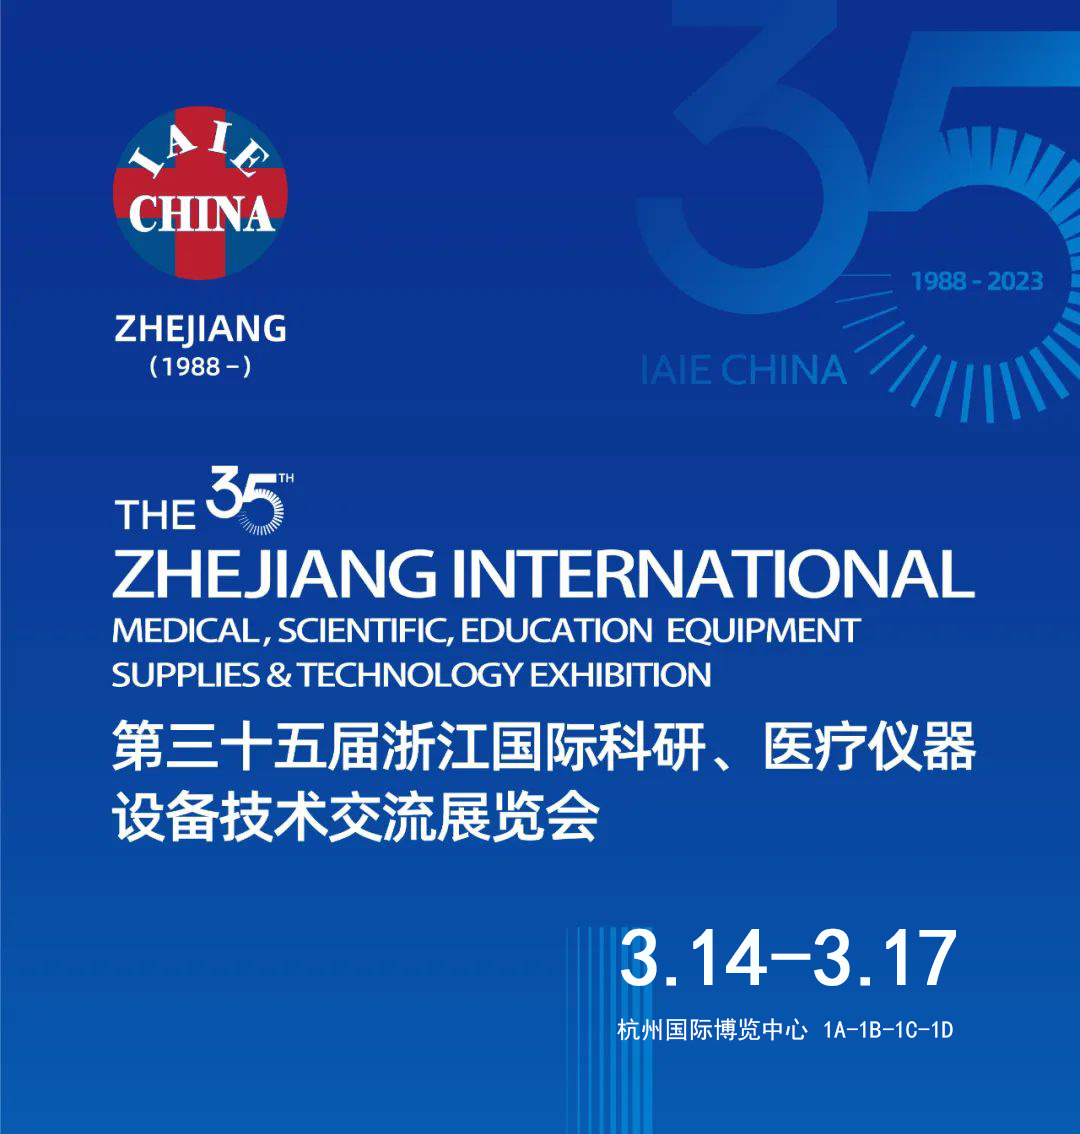 Xingmai Medical will participate in the 35th Zhejiang Spring Medical Exhibition in 2023